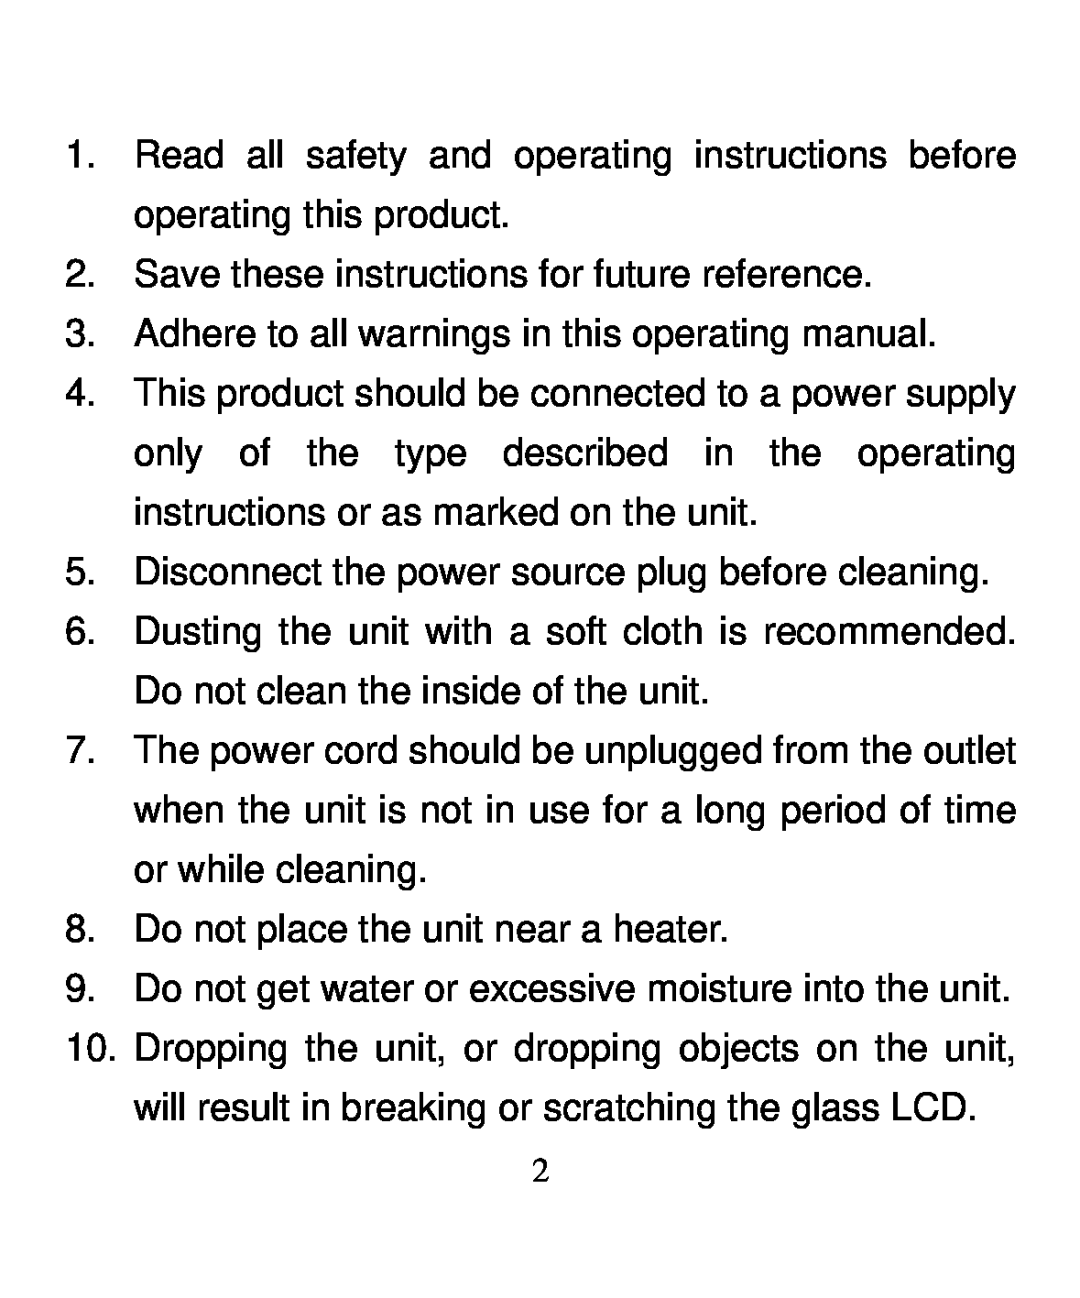 Nextar N3-502 user manual Save these instructions for future reference, Adhere to all warnings in this operating manual 